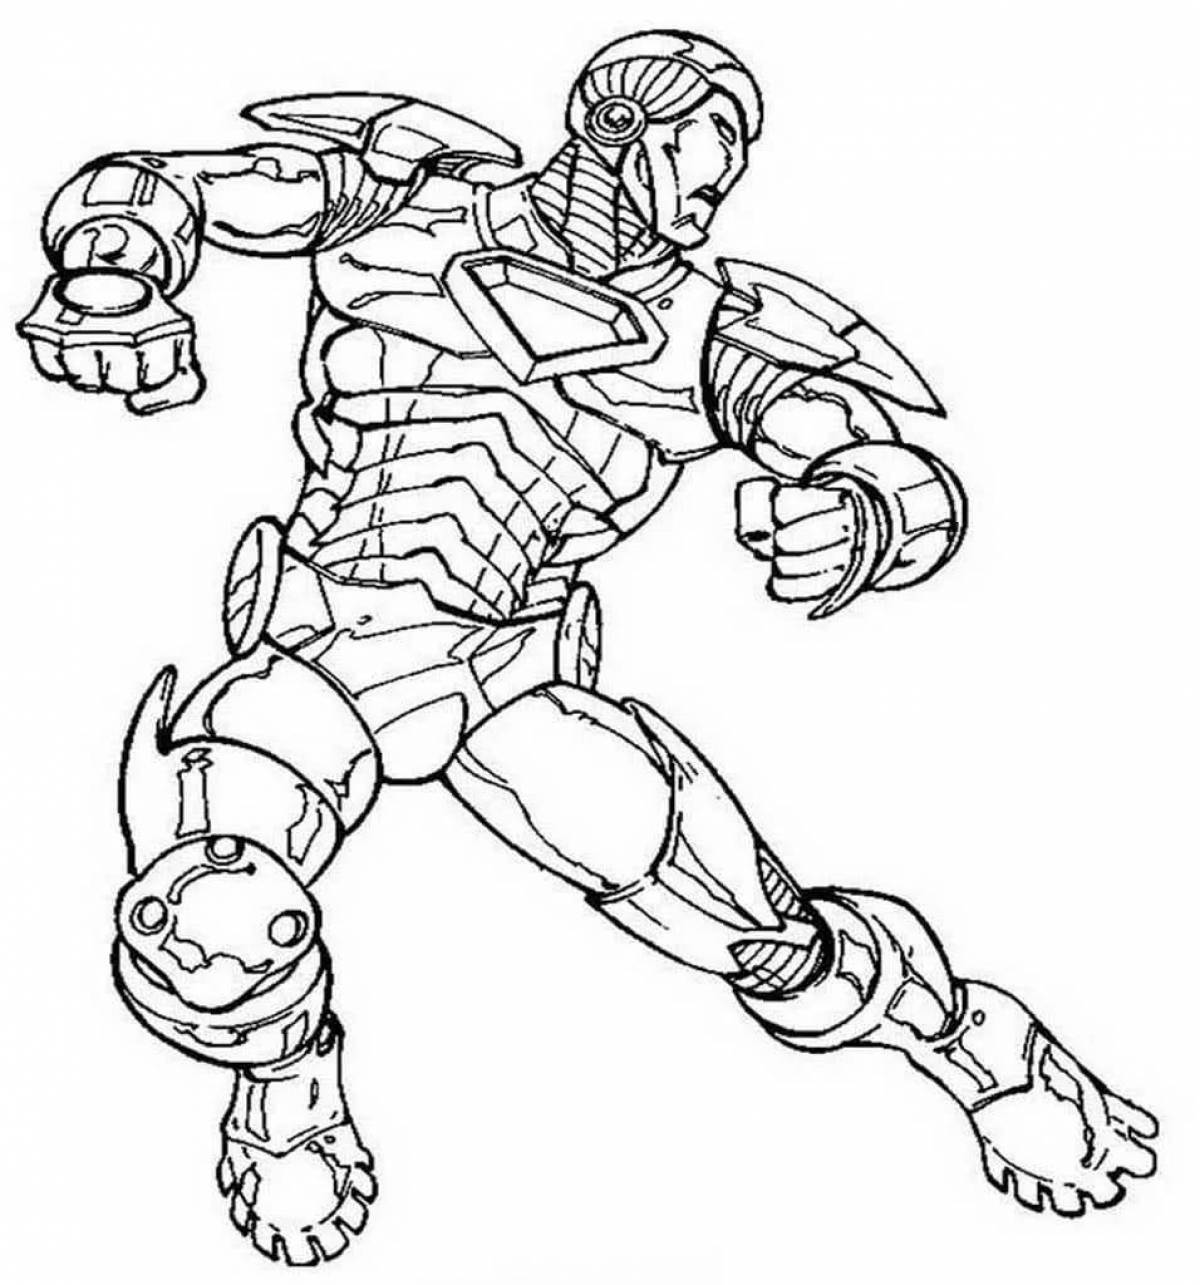 Adorable iron man coloring book for kids